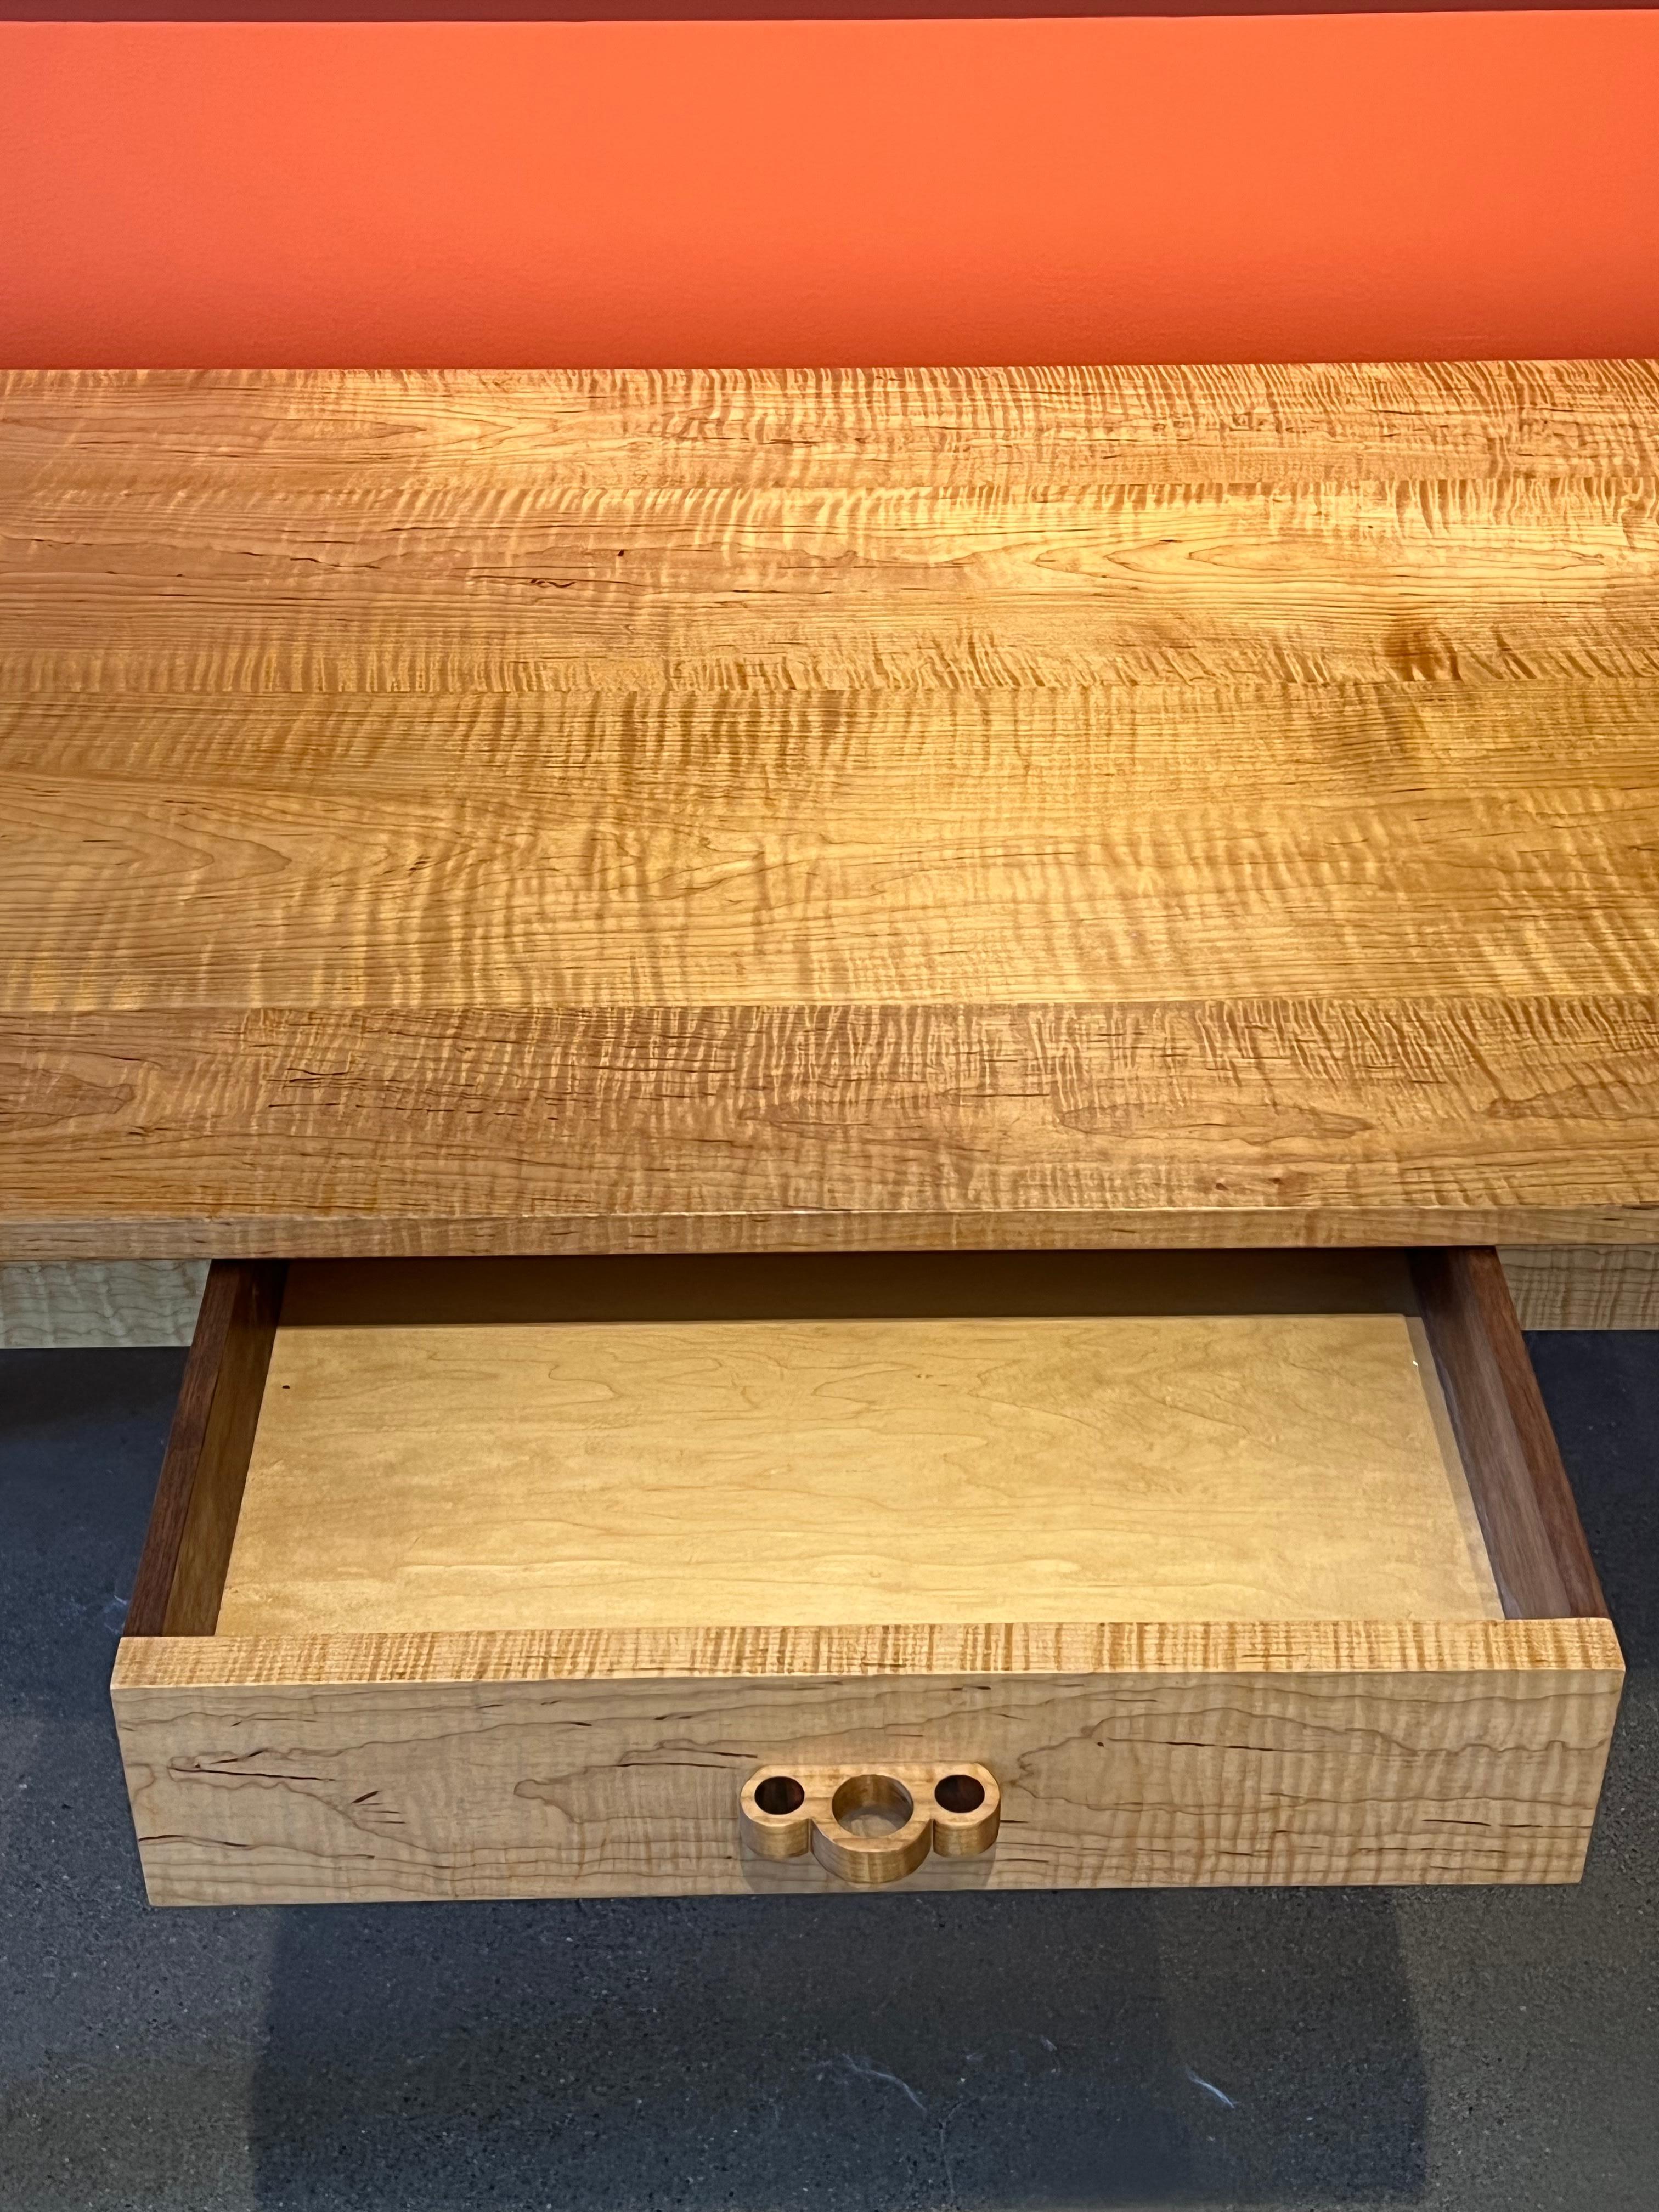 Tiger striped maple table by Stuart Welch
Curly Maple, Claro Walnut details 29.5?H x 31.5?W

About the artist: 
People often ask where do I get my ideas? Early on I was fortunate to be exposed to wonderful teachers. Wendell Castle, James Krenov,